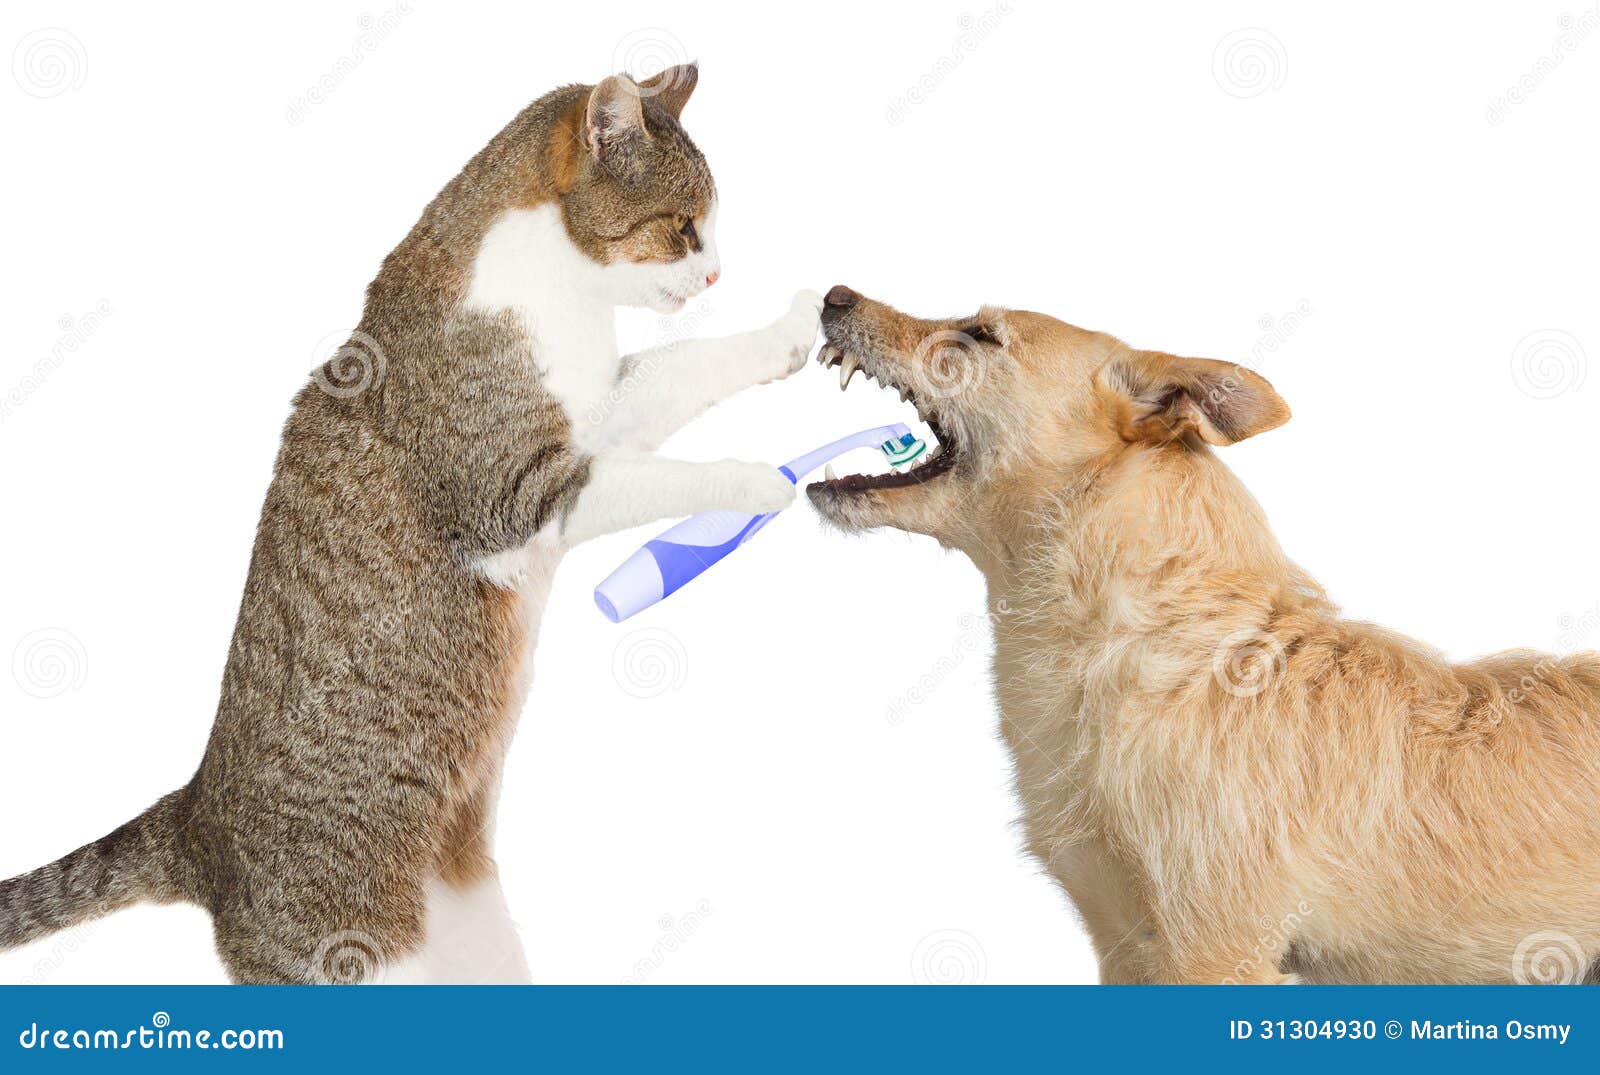 cute cat cleaning a dogs teeth